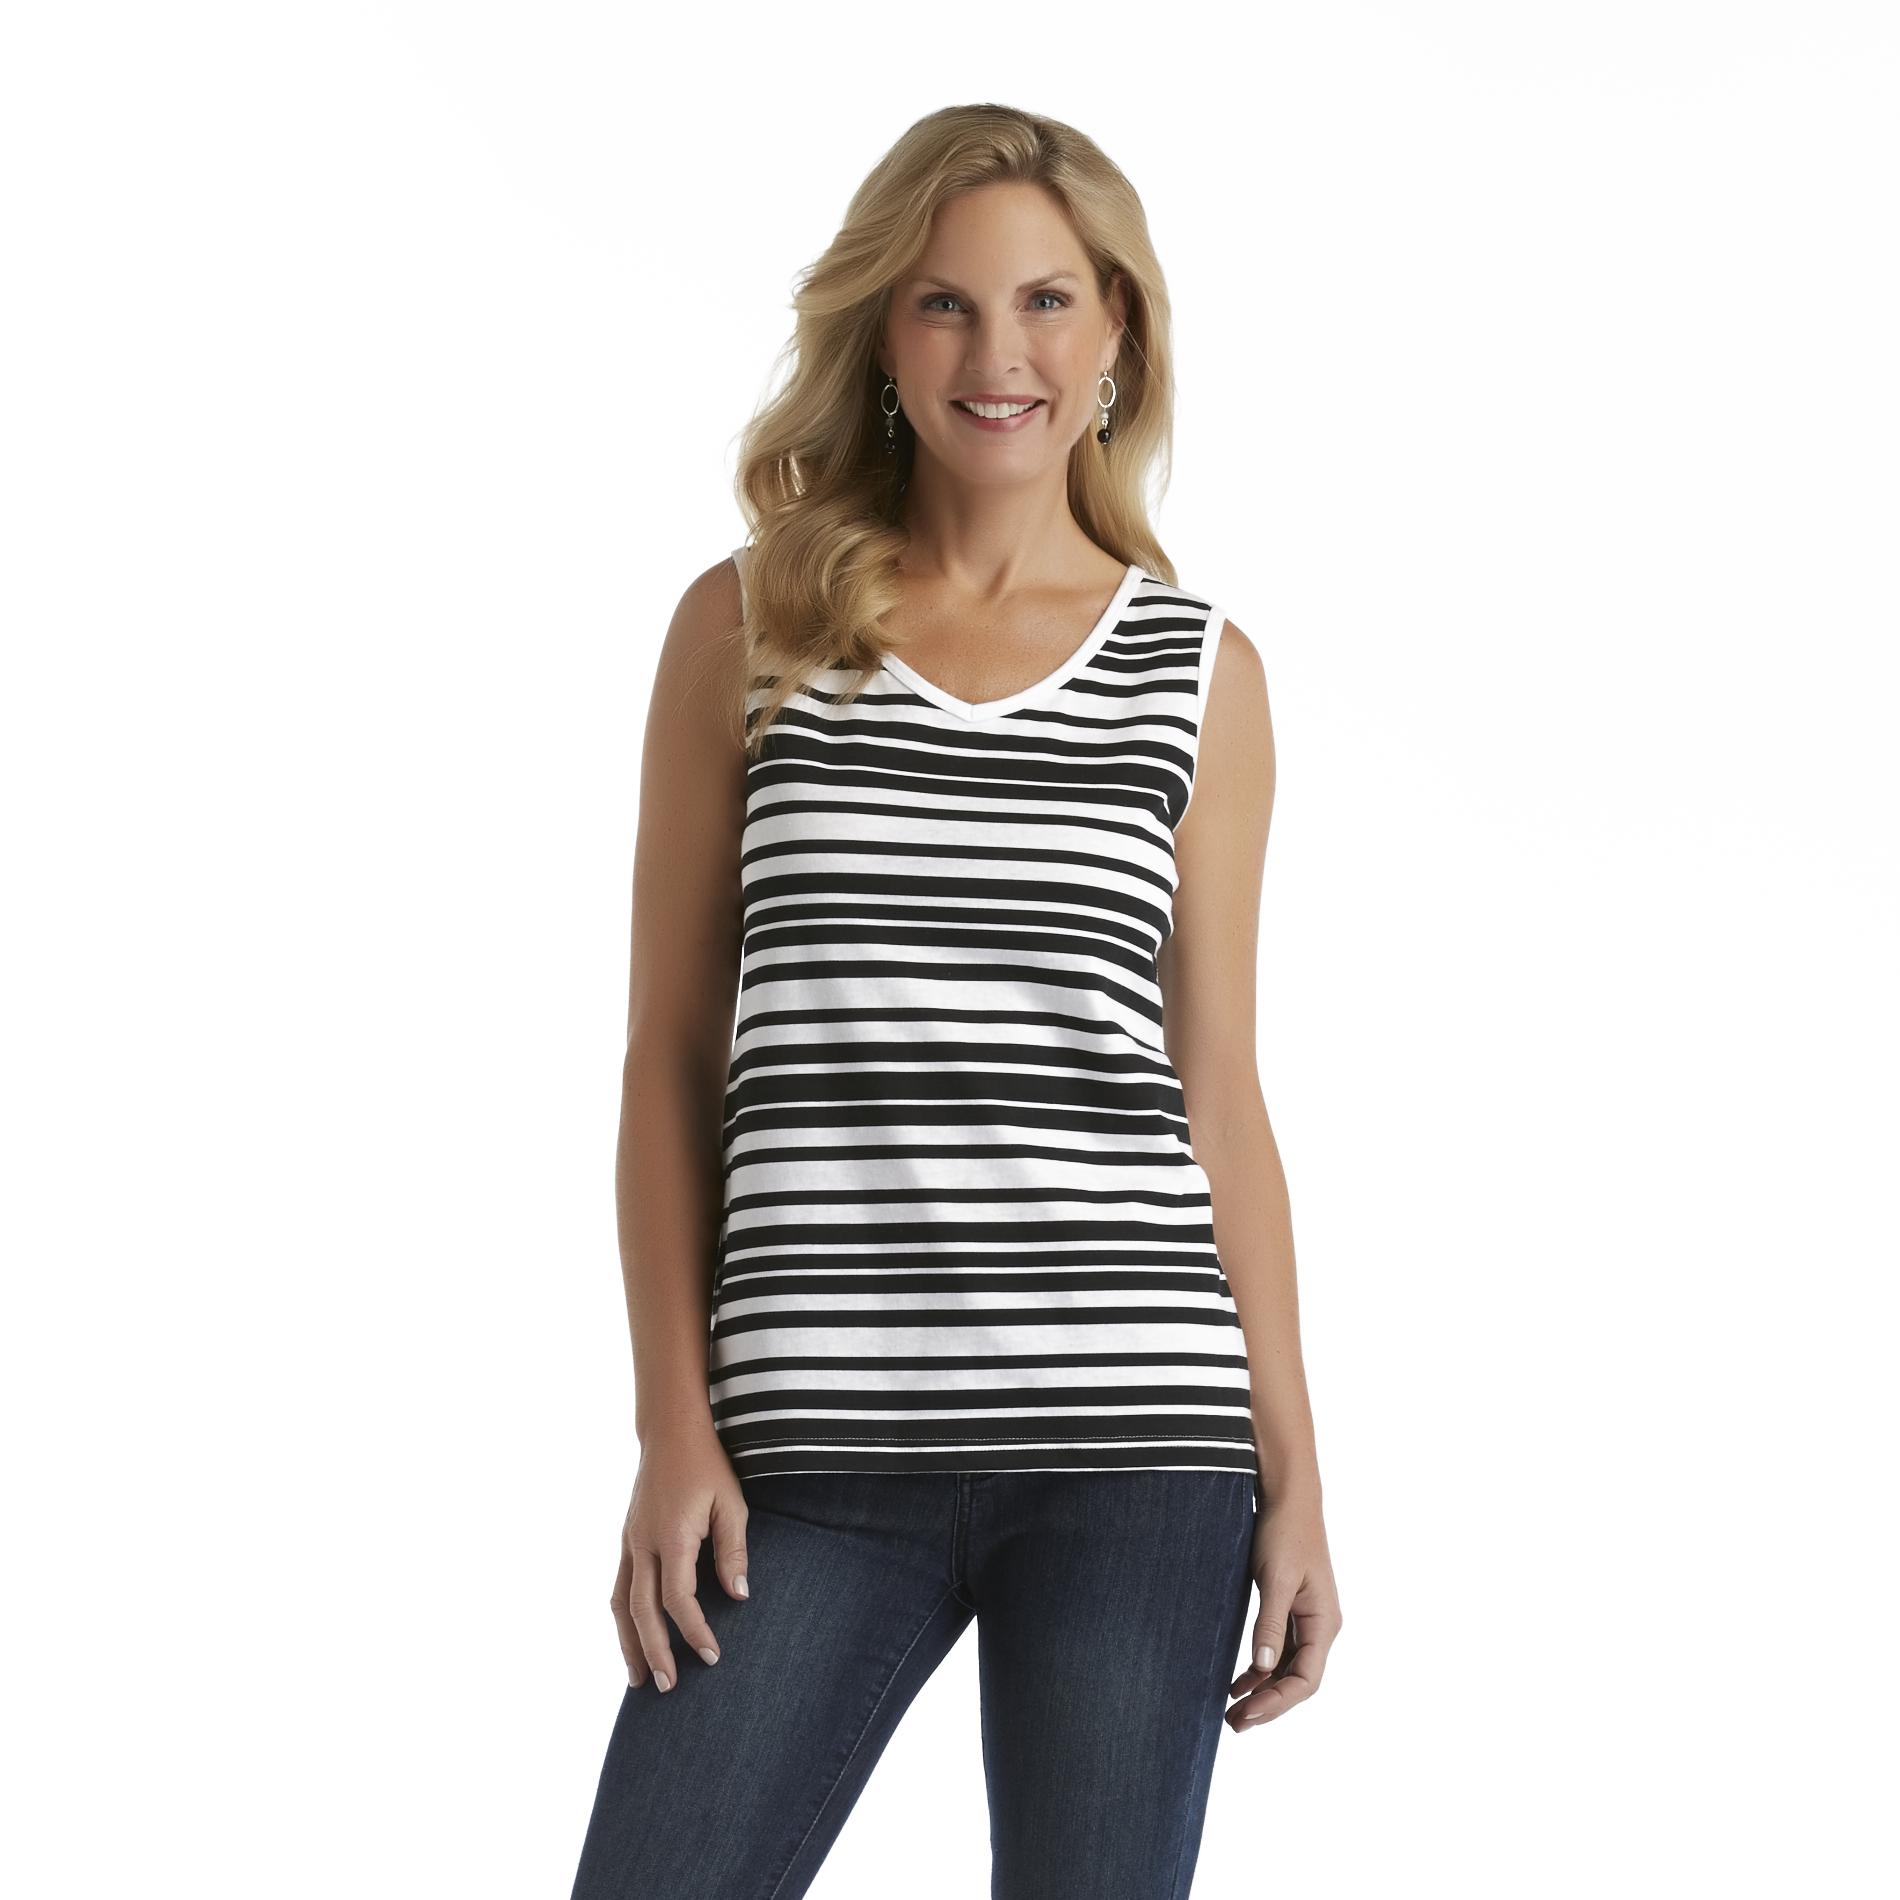 Basic Editions Women's V-Neck Tank Top - Striped